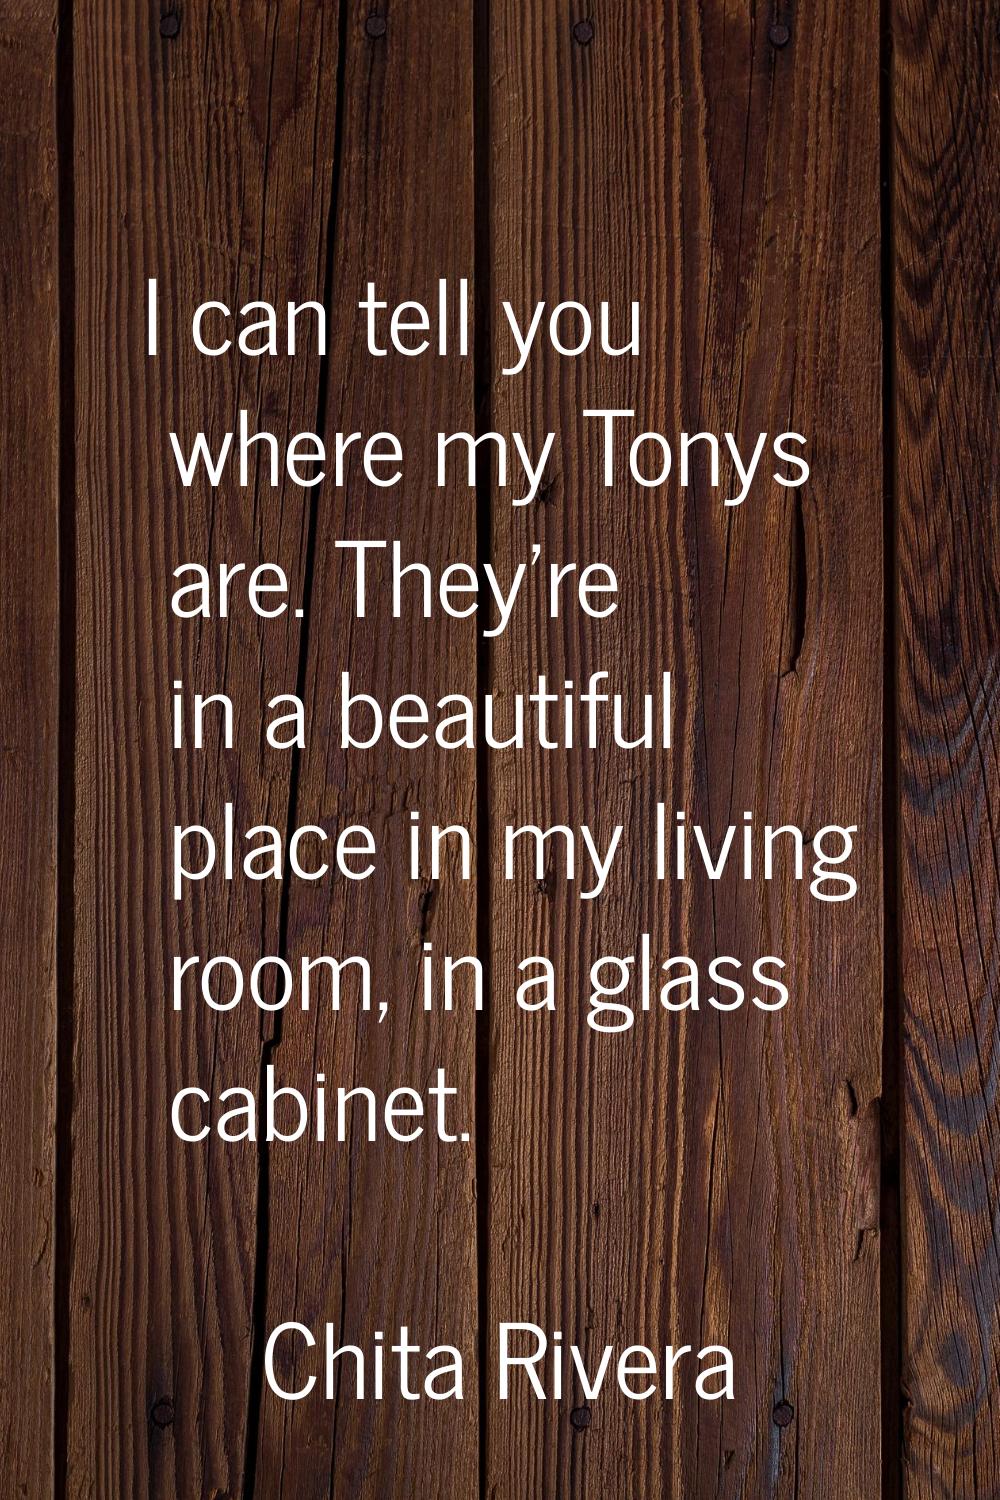 I can tell you where my Tonys are. They're in a beautiful place in my living room, in a glass cabin